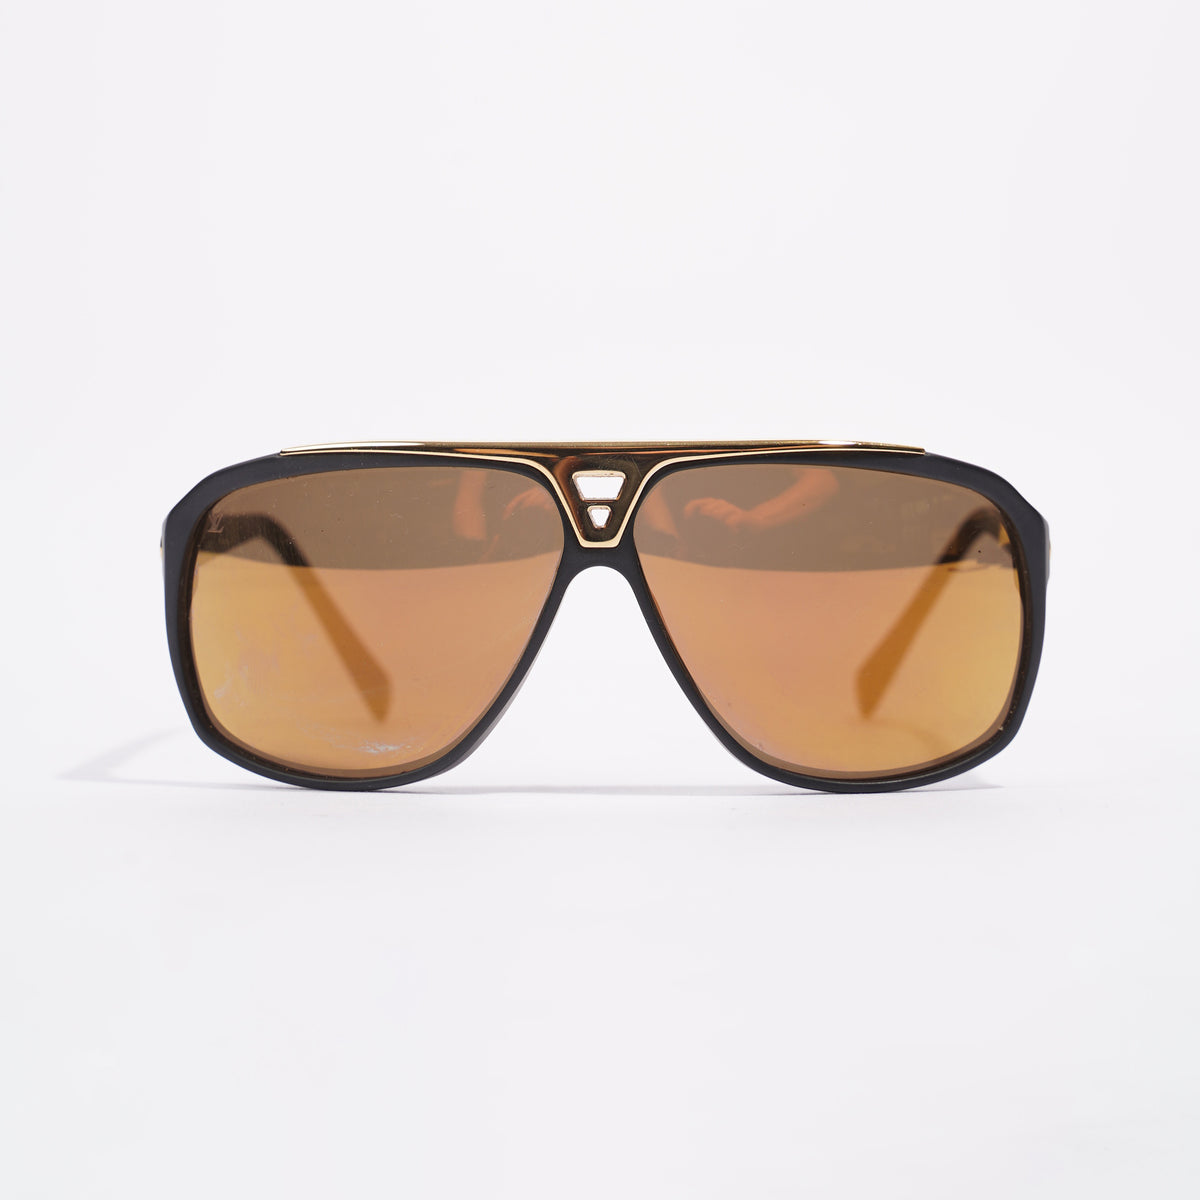 Louis Vuitton evidence sunglasses 100% authentic for Sale in